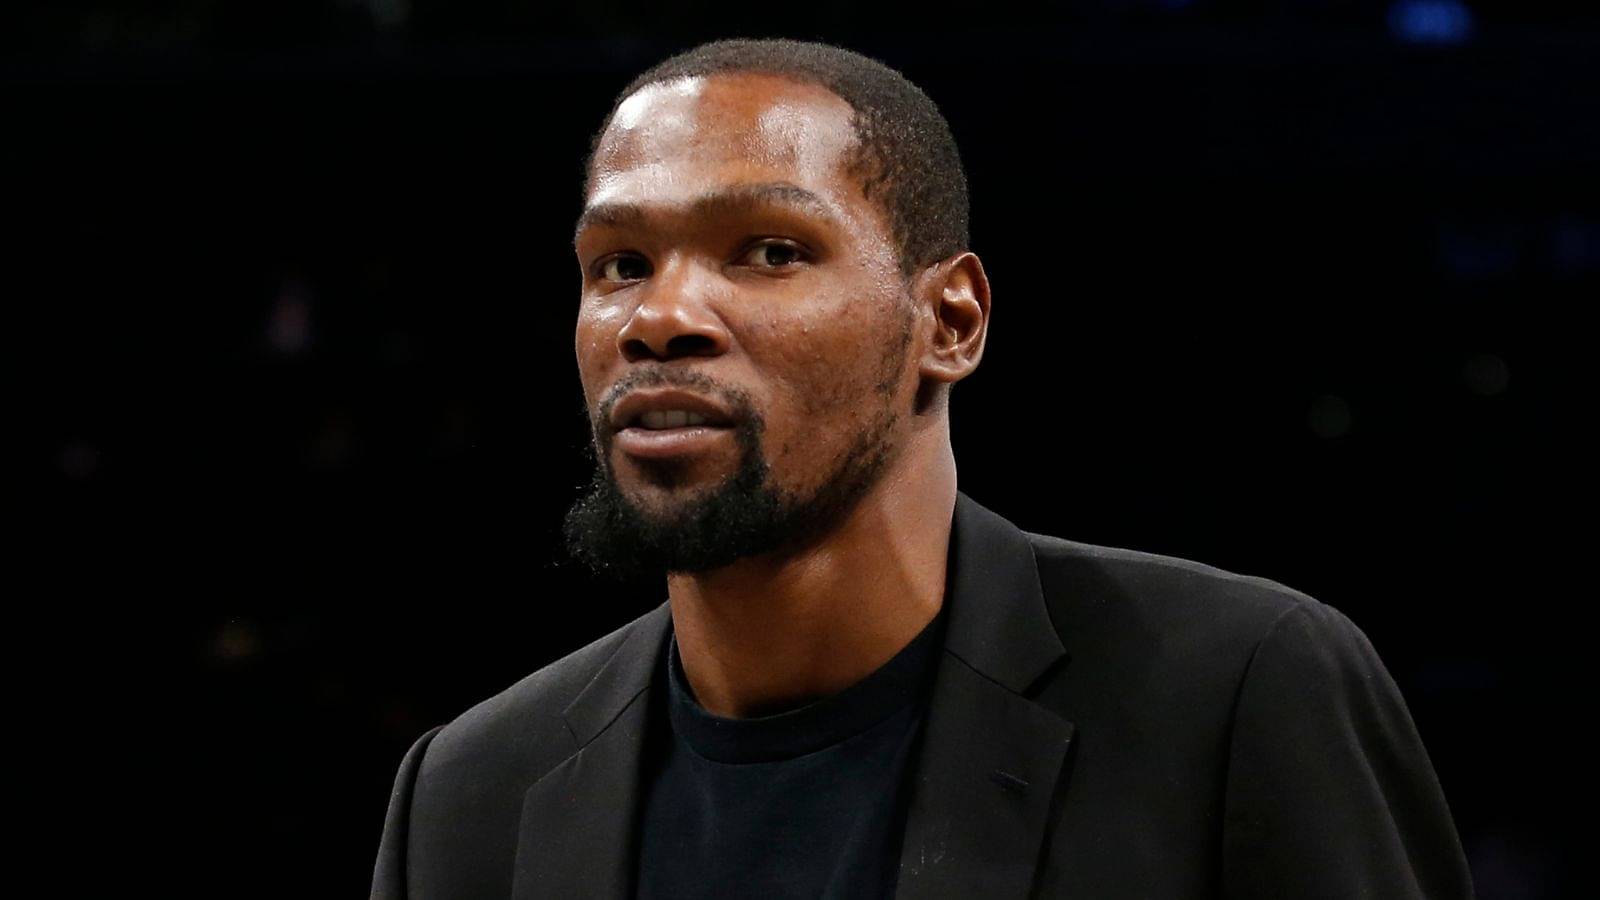 Kevin Durant Once Mistakenly Dropped Marijuana on Camera When it was Illegal and Avoided a $10,000 Fine